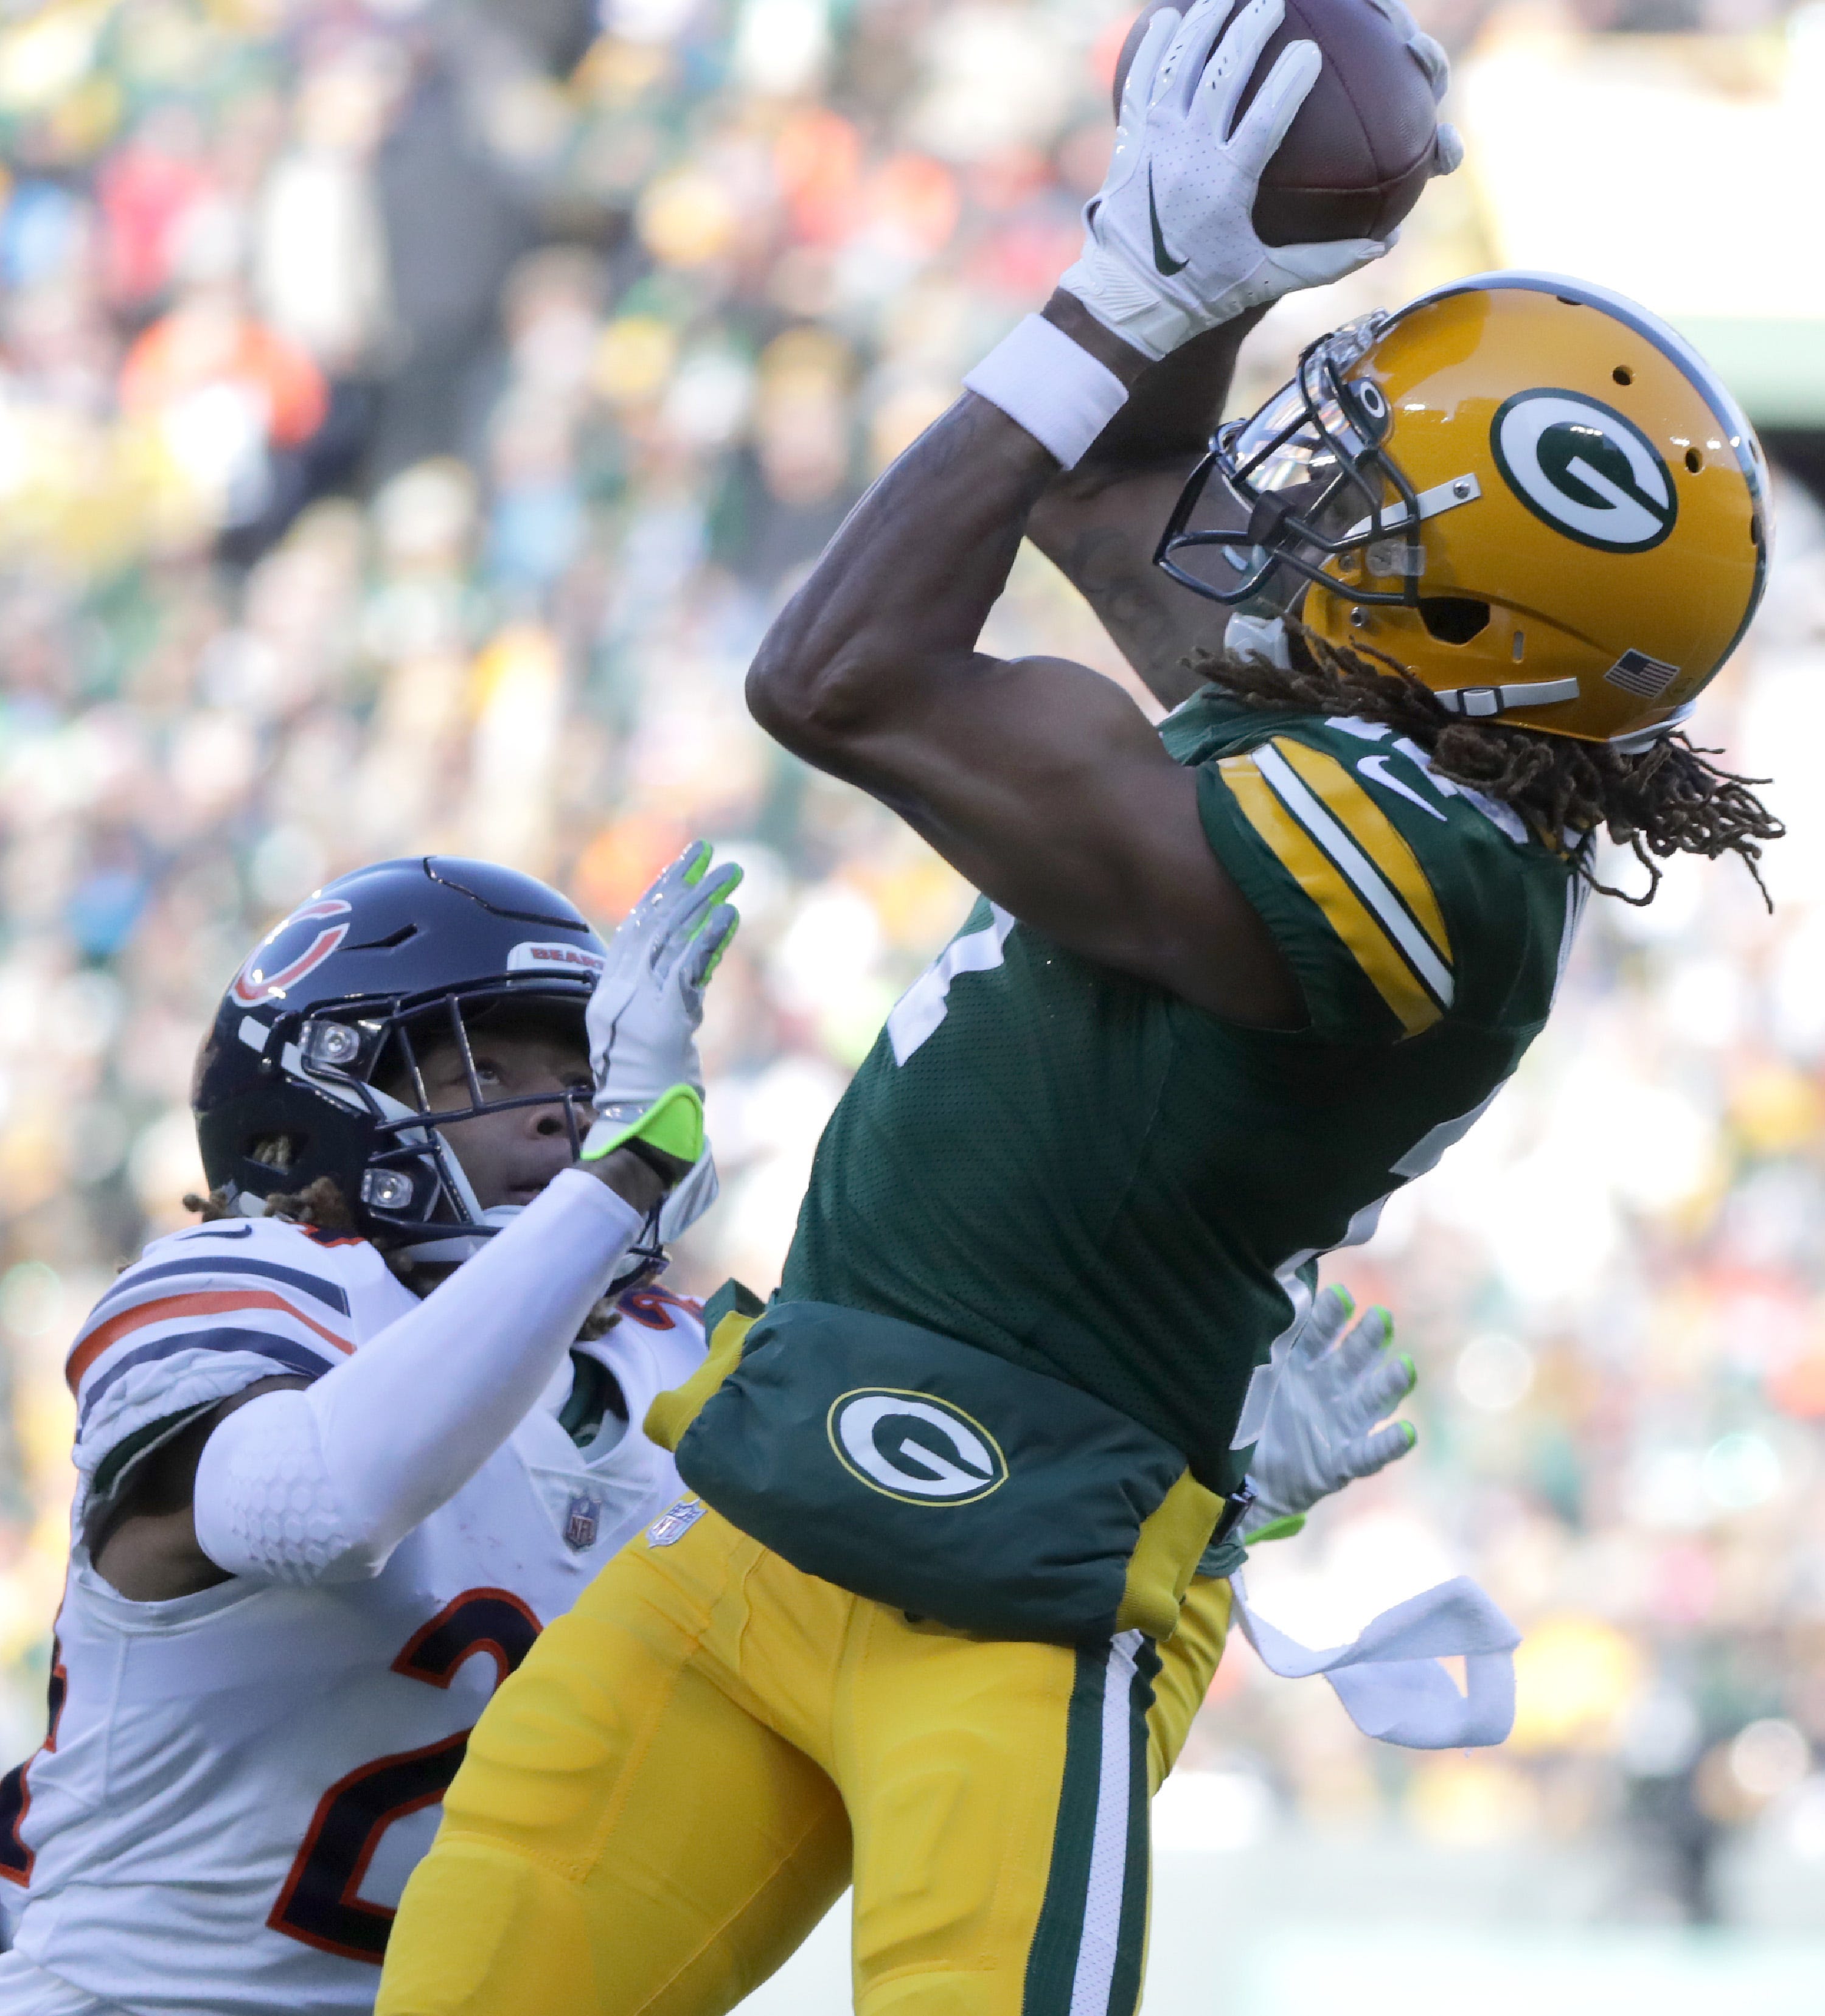 Green Bay Packers wide receiver Davante Adams (17) catches a first quarter touchdown pass over the defense of Chicago Bears cornerback Buster Skrine (24) during their football game on Sunday, December 15, 2019, at Lambeau Field in Green Bay, Wis.